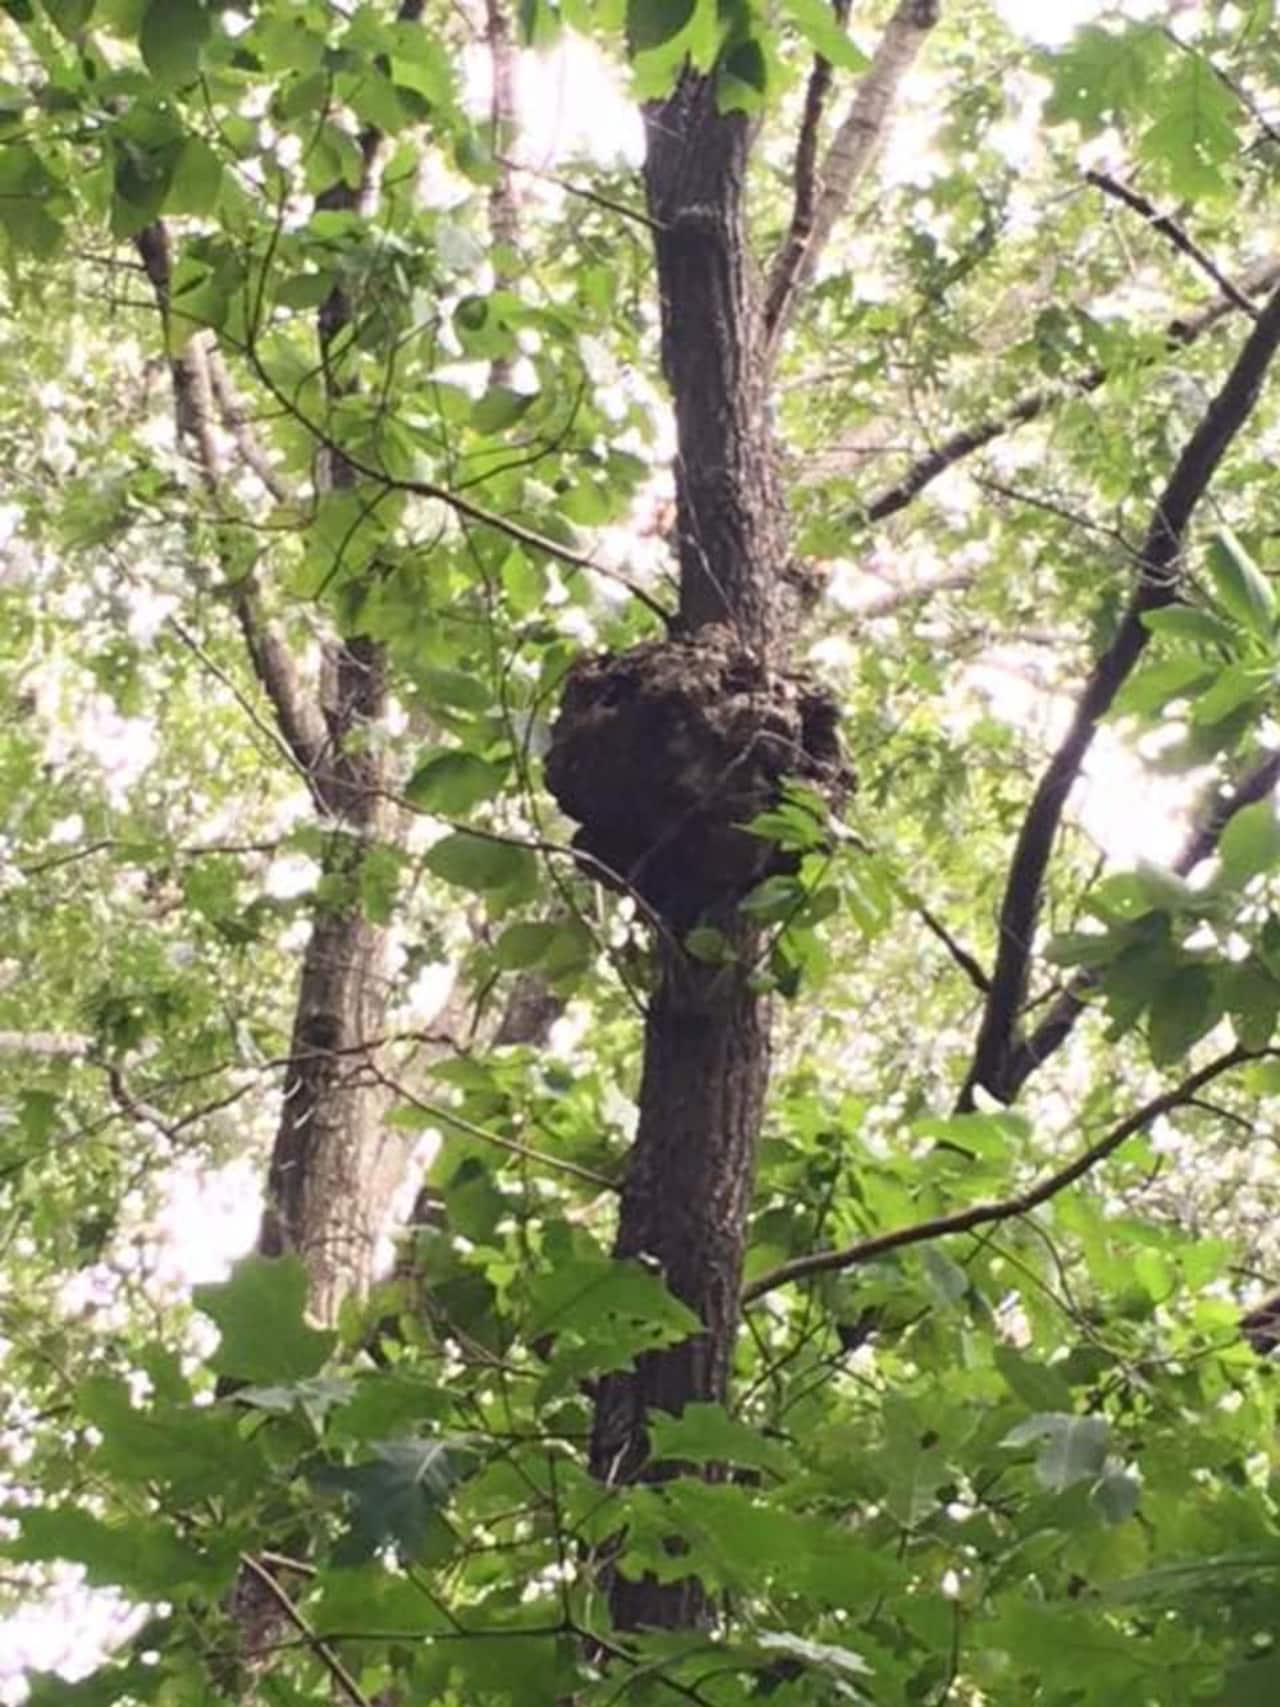 Ramapo police said they located this nest in the Montebello Elementary School playground and notified the school to remove it.